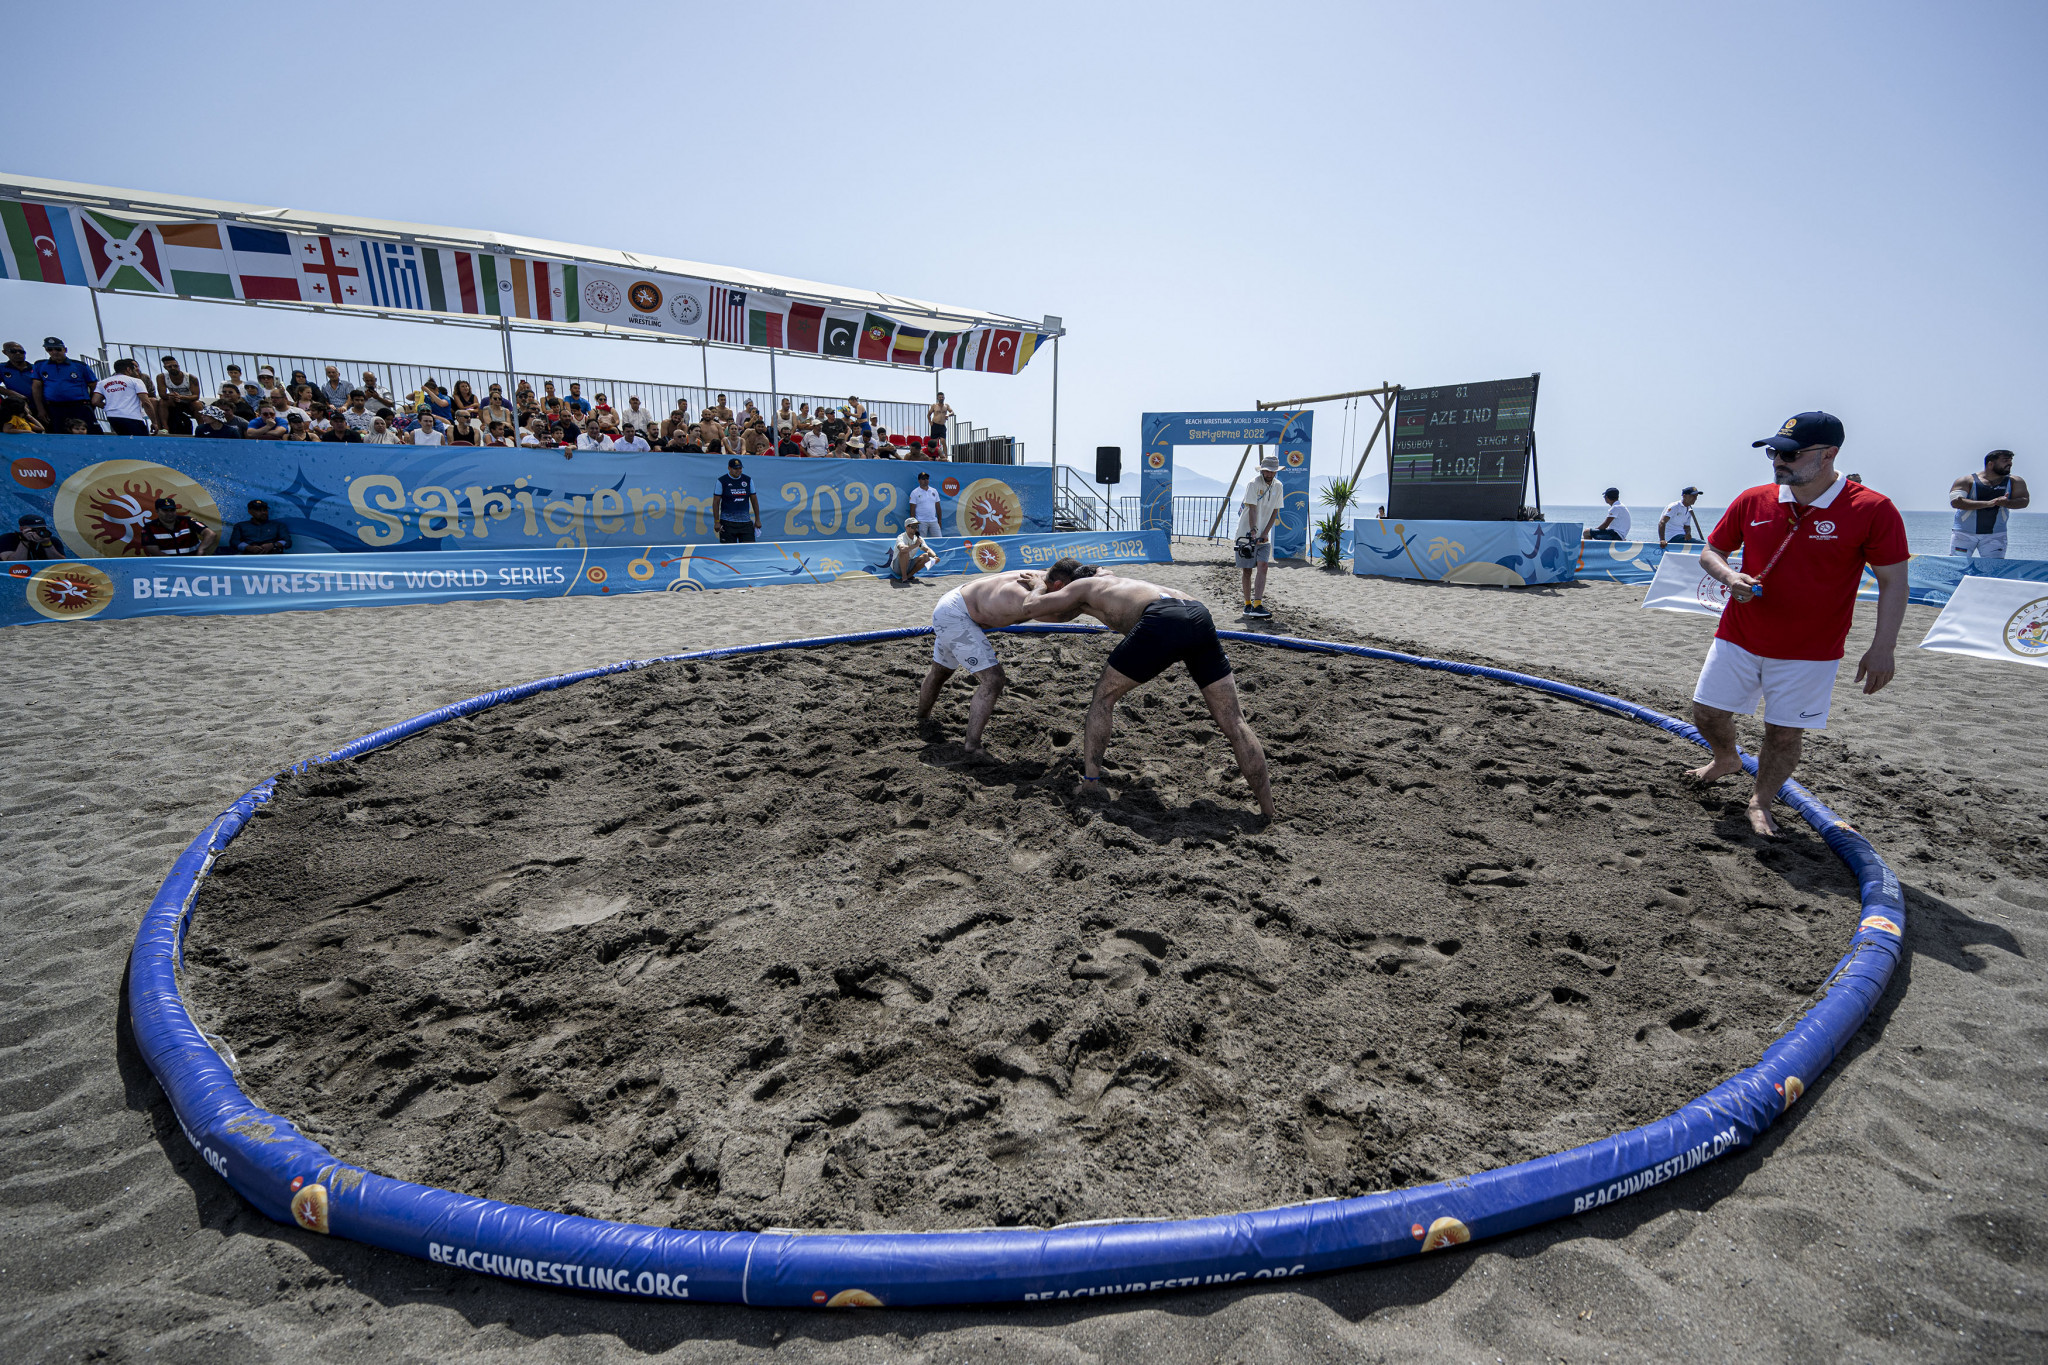 Constanța was the final stop of the Beach Wrestling World Series season ©Getty Images